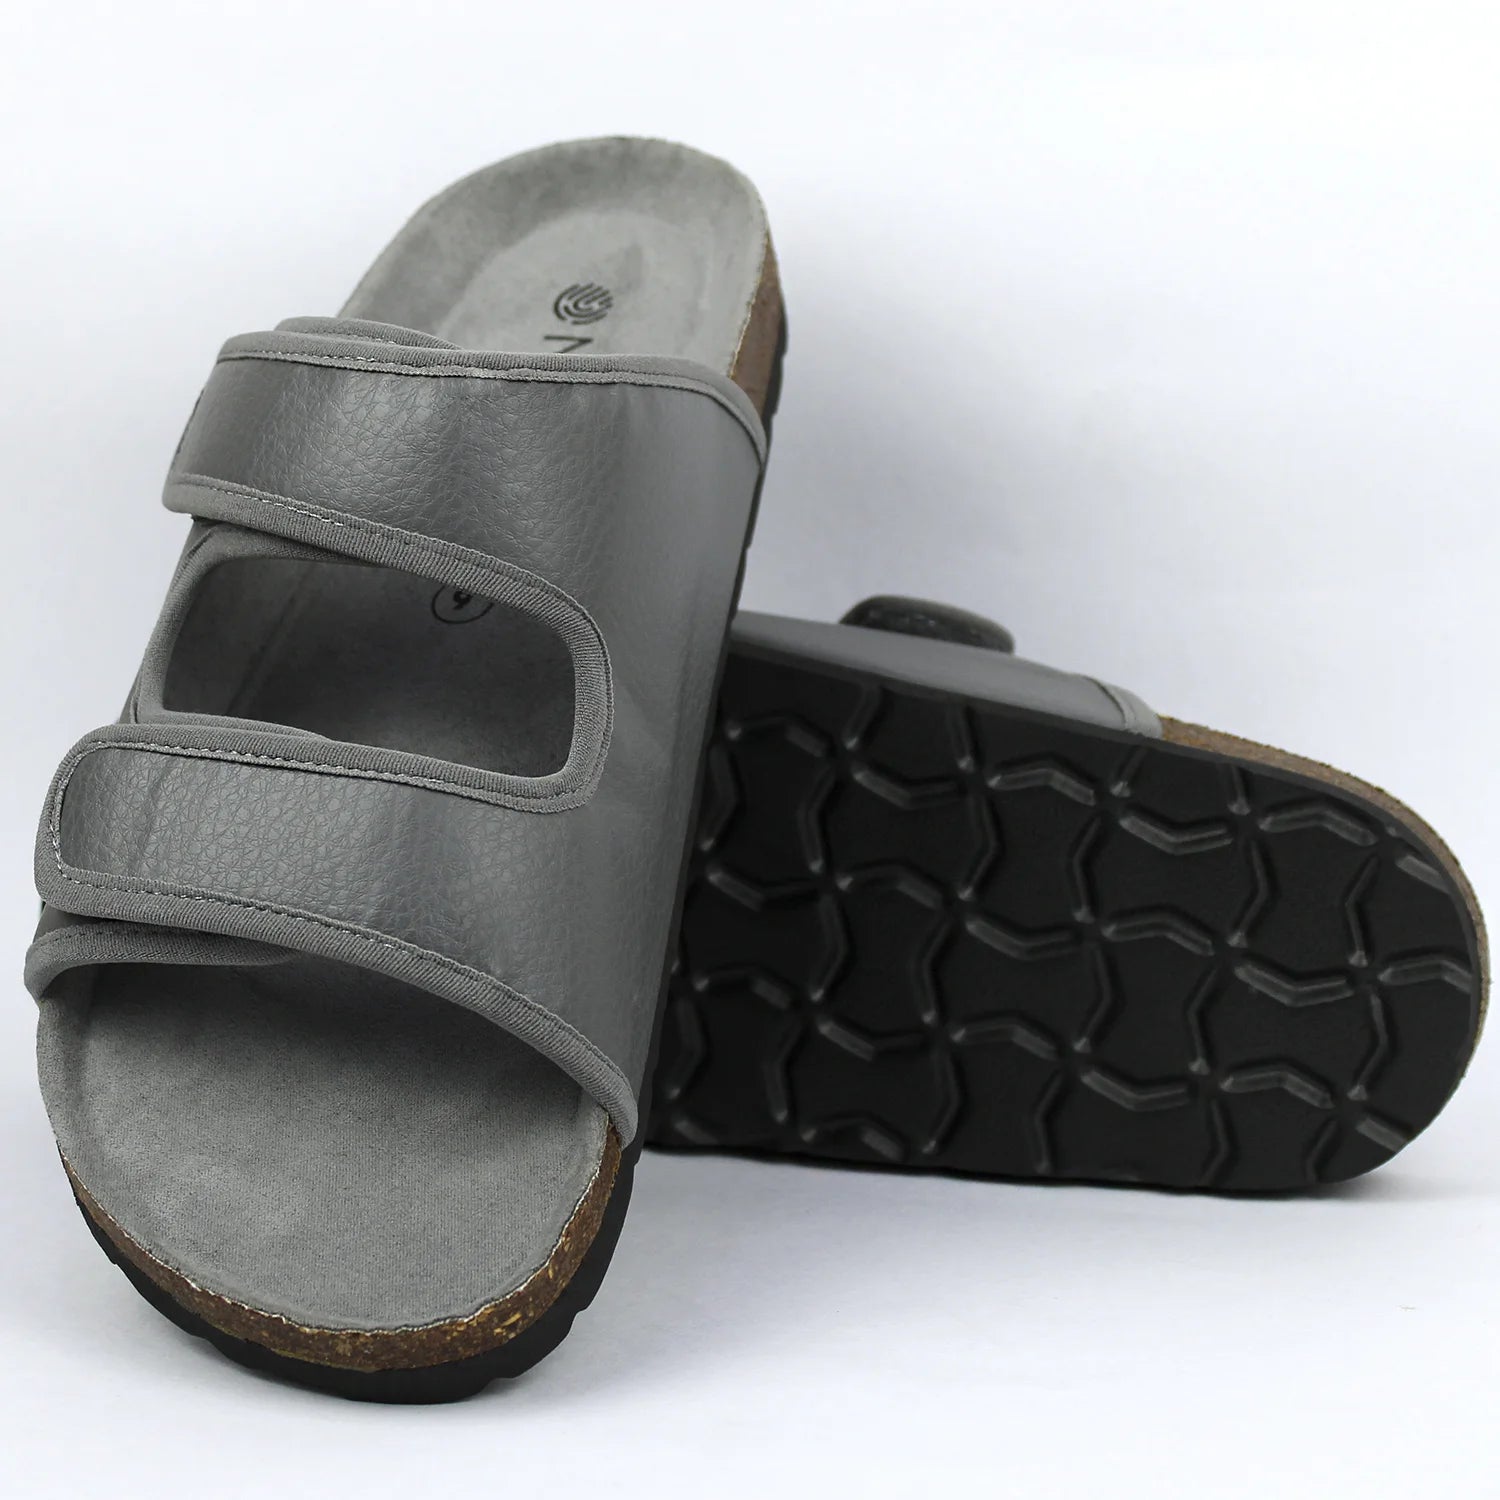 Experience all-day comfort with these mens sandals designed with adjustable straps